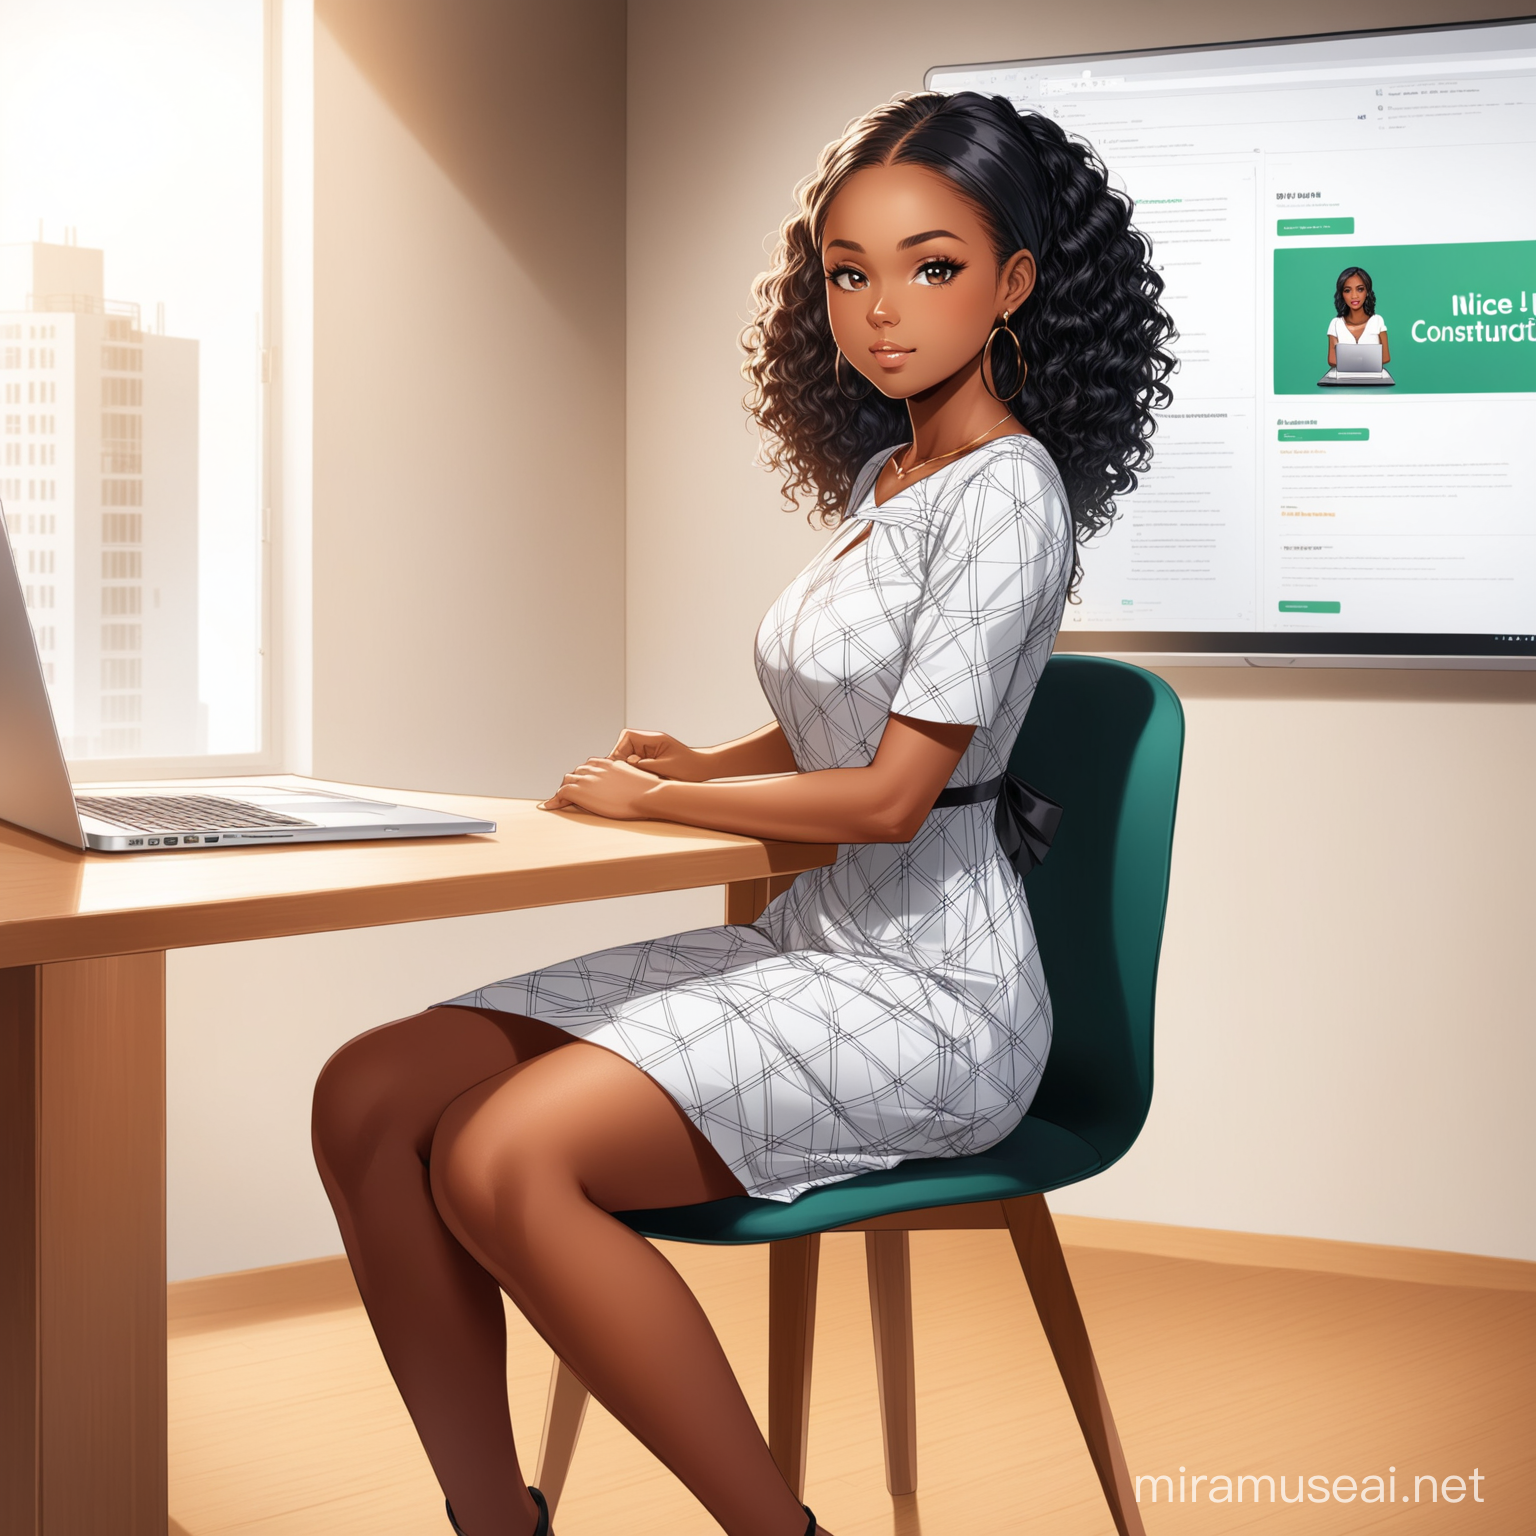 create an image of a young black lady sitting on a chair and a table in front of her with a laptop in a nice room with JWest Construction hub written in her dress and at the back of the wall behind her giving a presentation